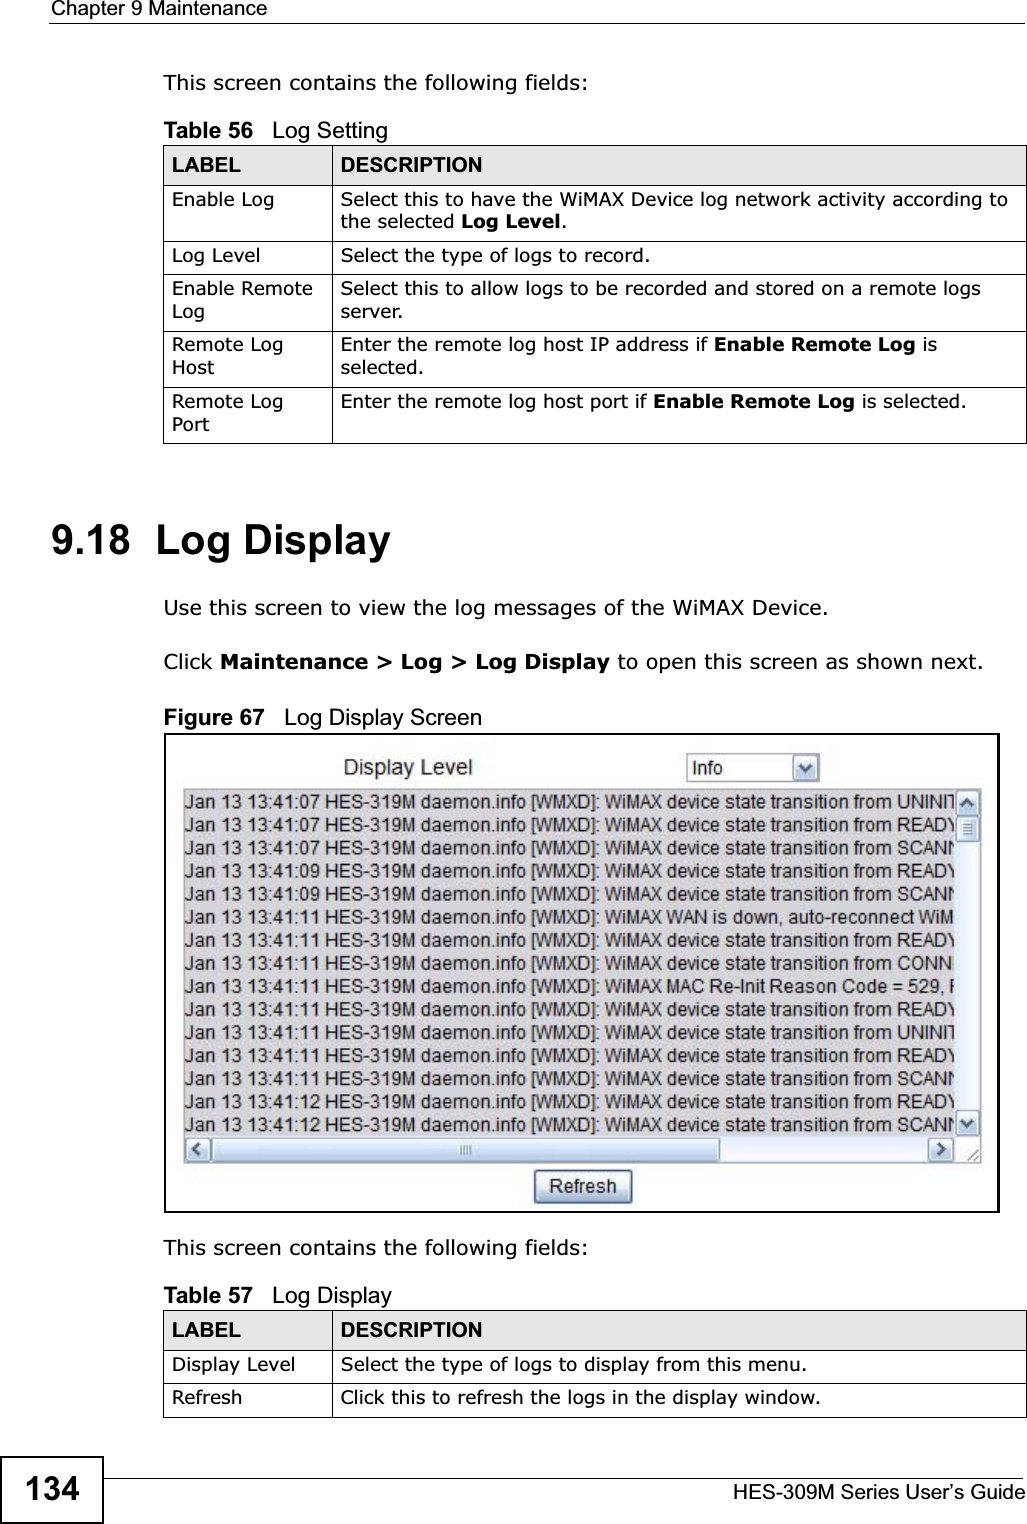 Chapter 9 MaintenanceHES-309M Series User’s Guide134This screen contains the following fields:9.18  Log DisplayUse this screen to view the log messages of the WiMAX Device.Click Maintenance &gt; Log &gt; Log Display to open this screen as shown next.Figure 67   Log Display ScreenThis screen contains the following fields:Table 56   Log SettingLABEL DESCRIPTIONEnable Log Select this to have the WiMAX Device log network activity according to the selected Log Level.Log Level Select the type of logs to record.Enable Remote LogSelect this to allow logs to be recorded and stored on a remote logs server.Remote Log HostEnter the remote log host IP address if Enable Remote Log is selected.Remote Log PortEnter the remote log host port if Enable Remote Log is selected.Table 57   Log DisplayLABEL DESCRIPTIONDisplay Level Select the type of logs to display from this menu.Refresh Click this to refresh the logs in the display window.